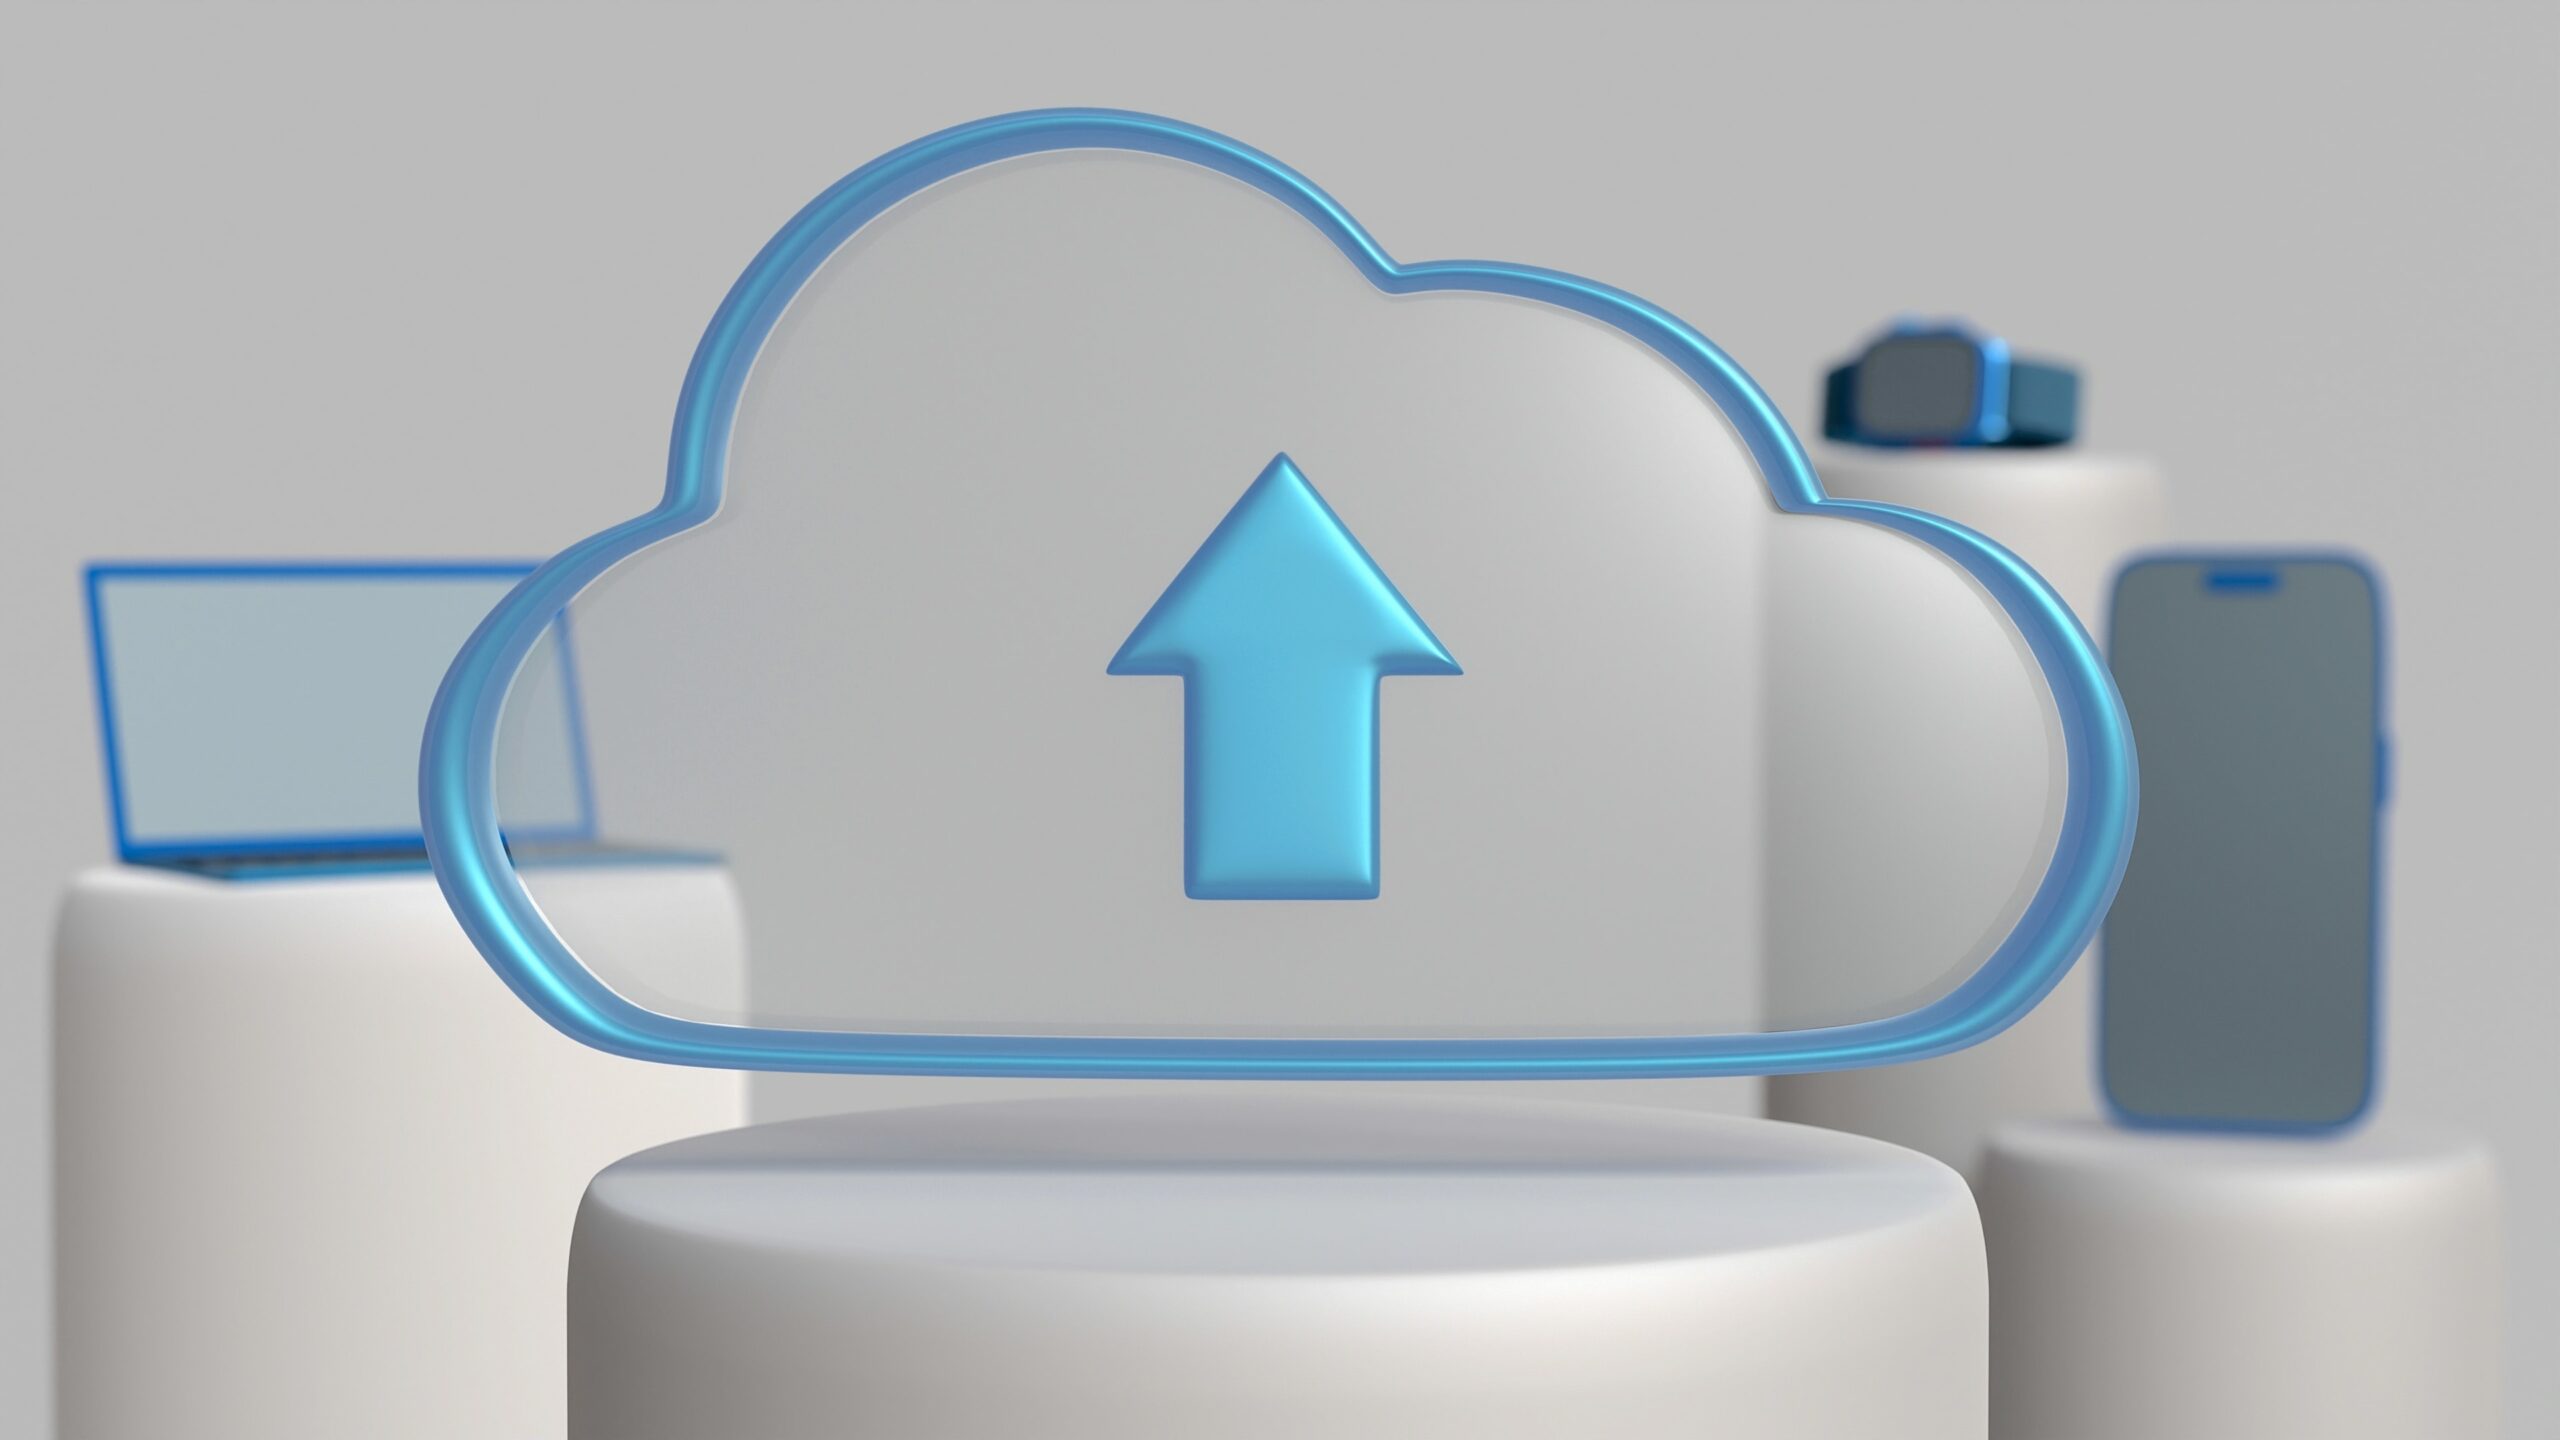 A cloud backup solution with an arrow pointing up.